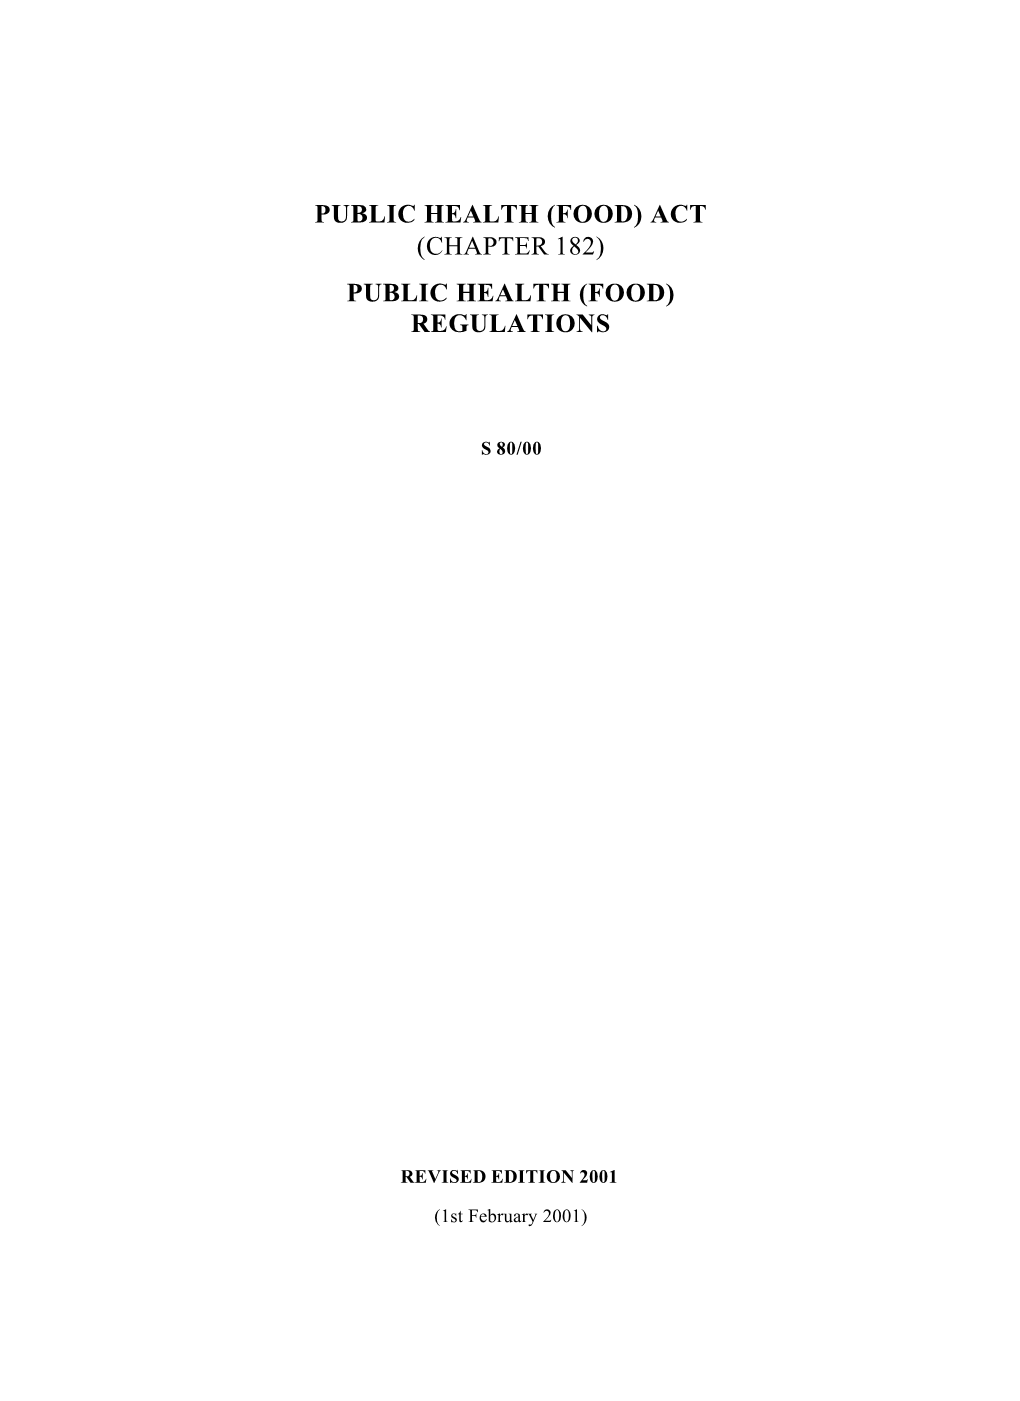 Act (Chapter 182) Public Health (Food) Regulations